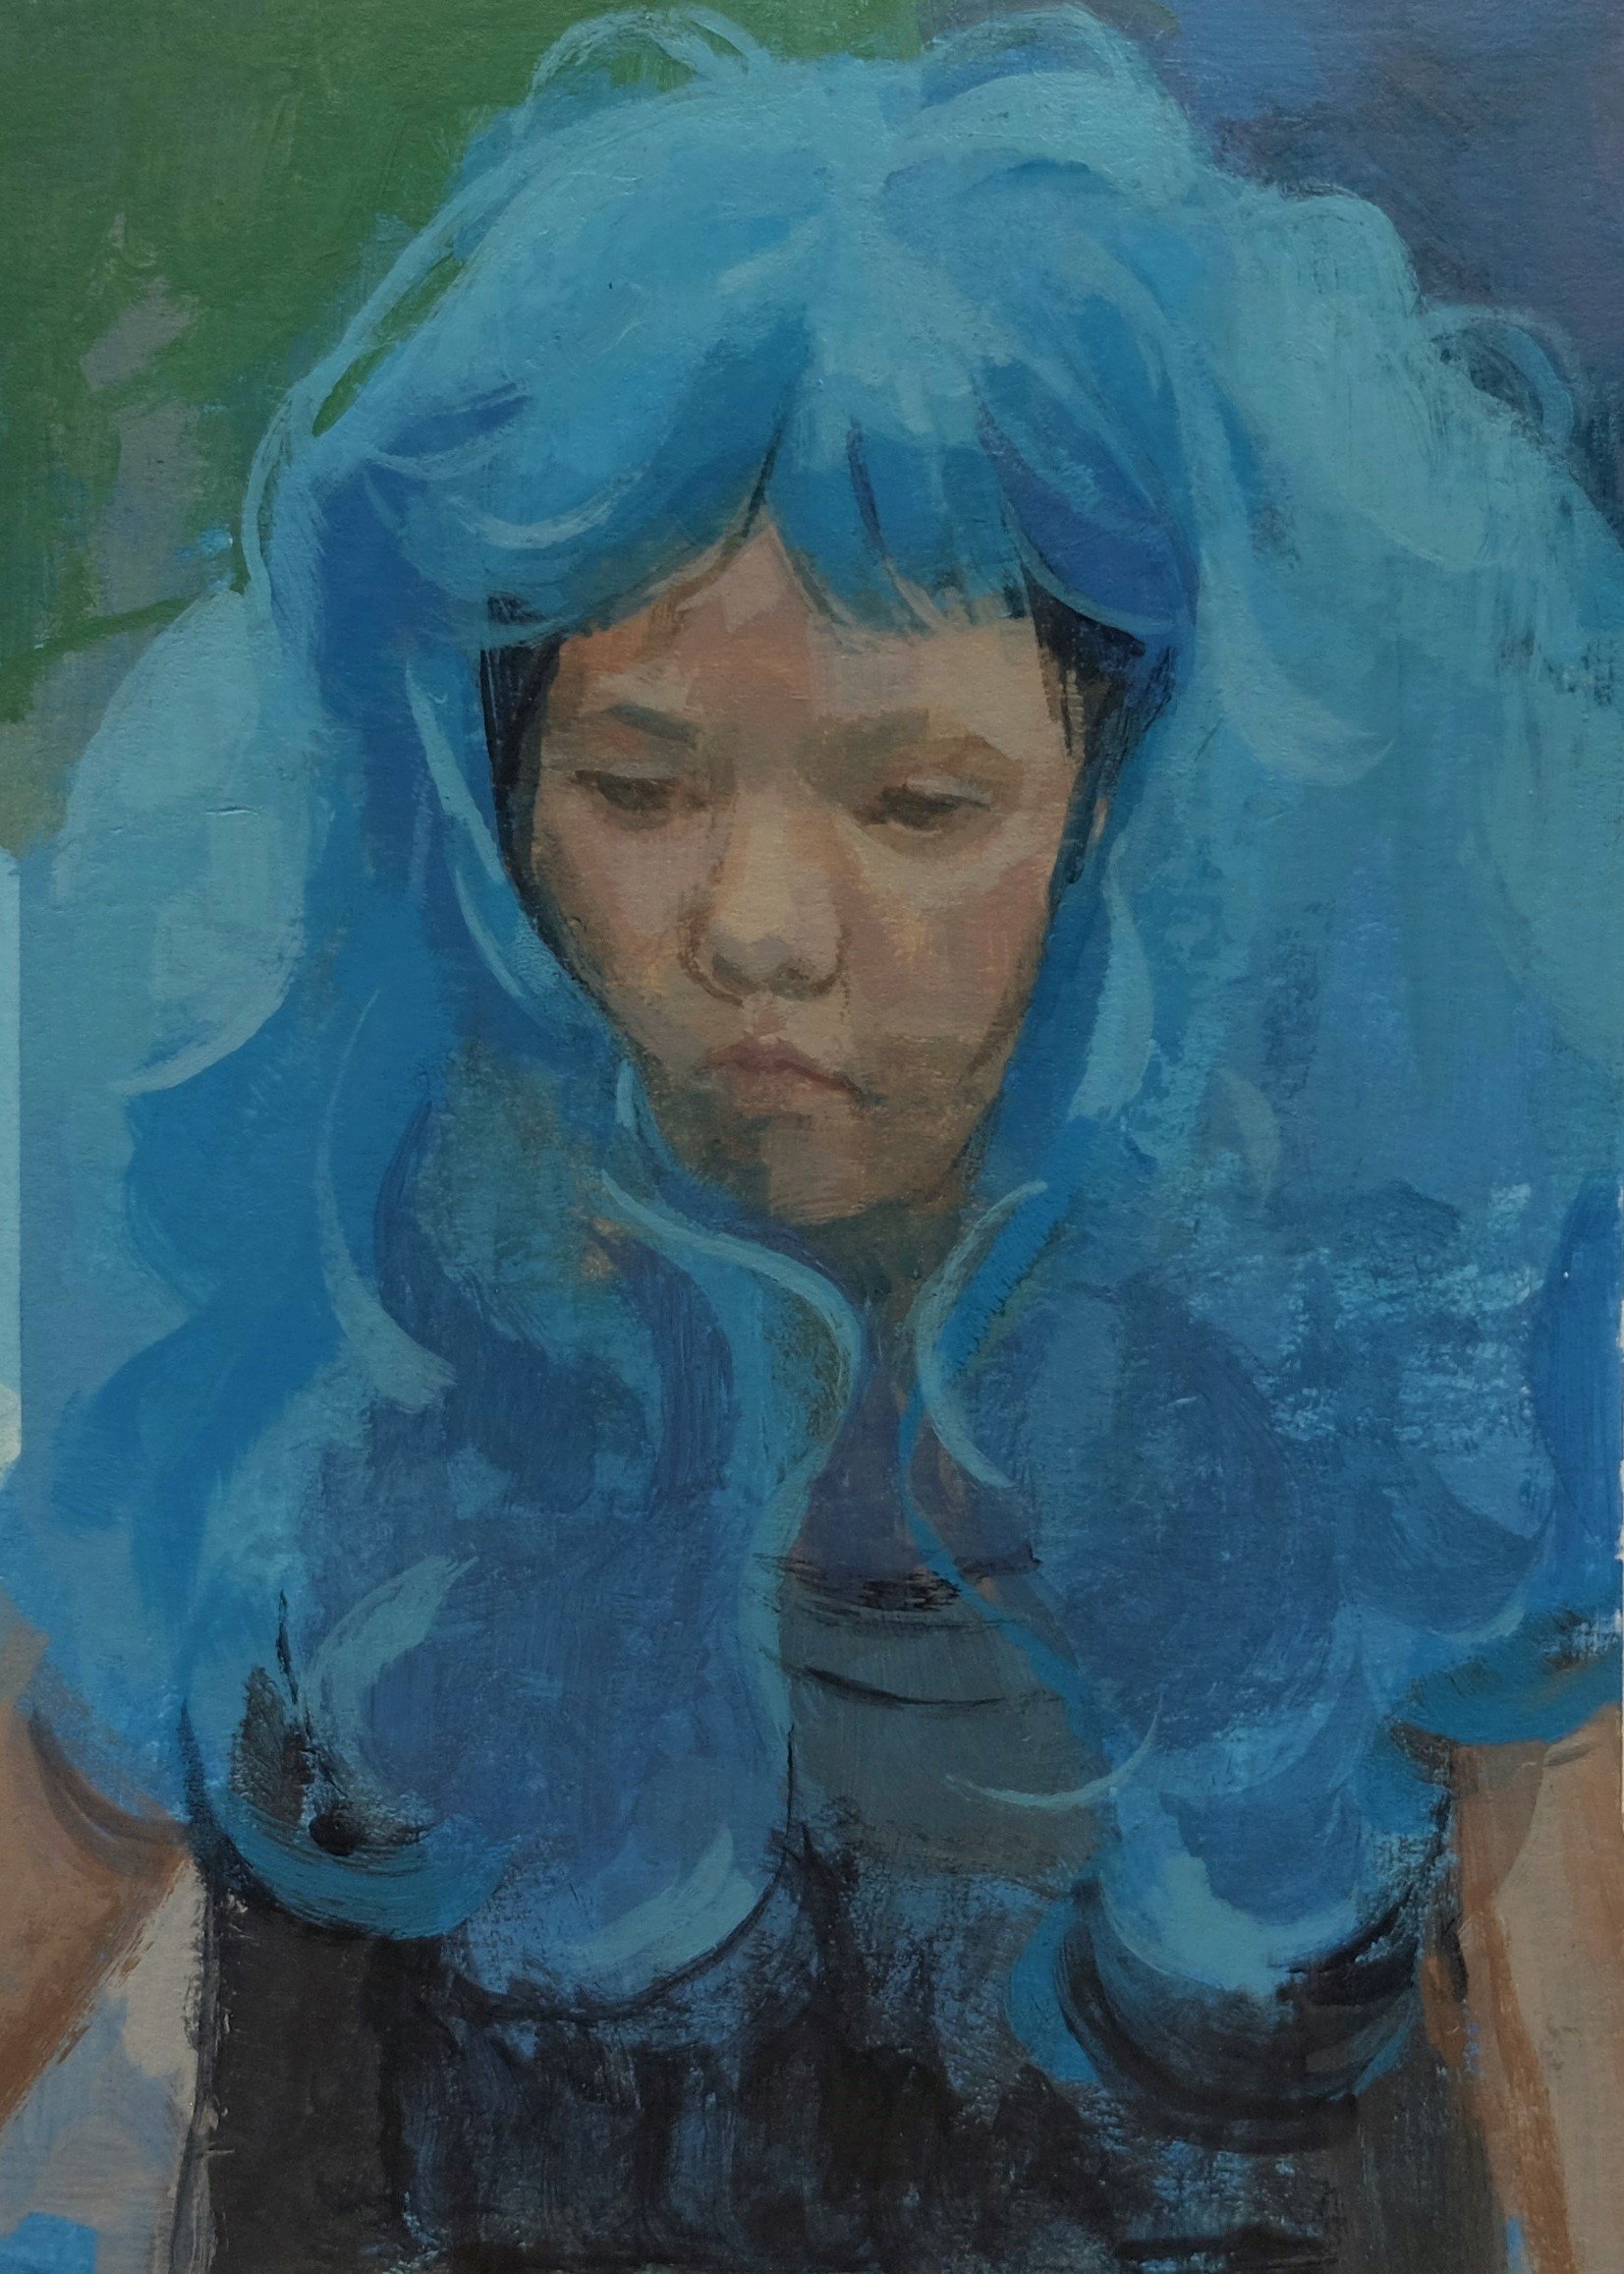 blue wig 5x7 inches 12x18 cm acrylic on watercolor paper a scherer.JPG